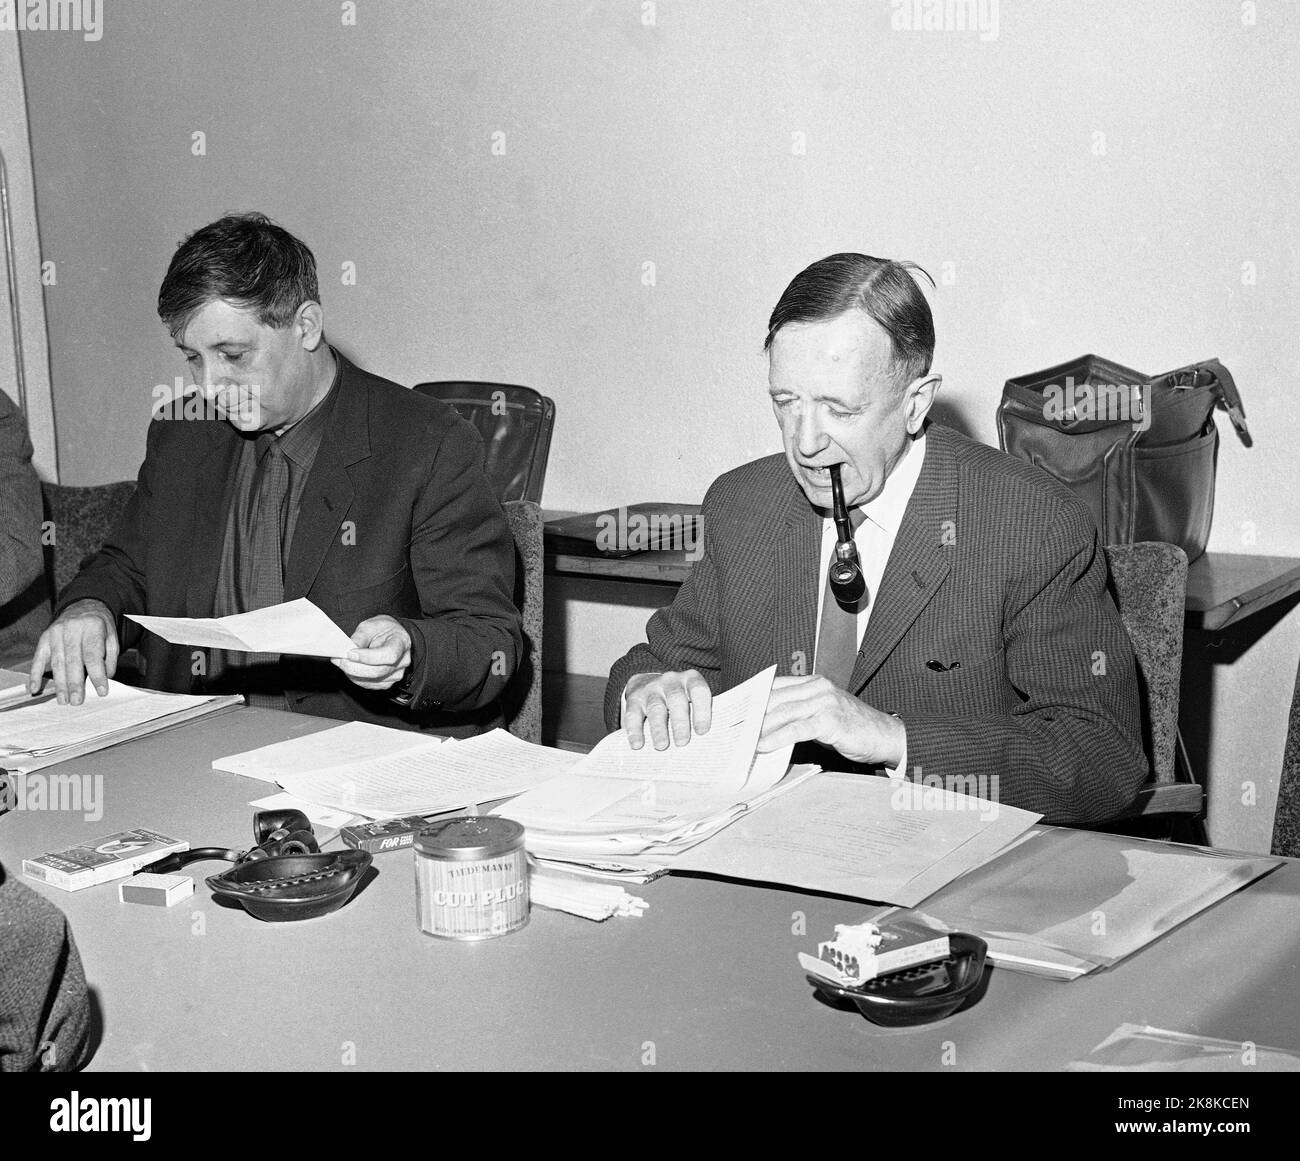 Oslo 19630529 The Broadcasting Council meeting. The chairman of the Broadcasting Council Torolf Elster t.v. And broadcaster Hans Jacob Ustvedt photographed at the opening of the meeting. Photo: NTB. Stock Photo